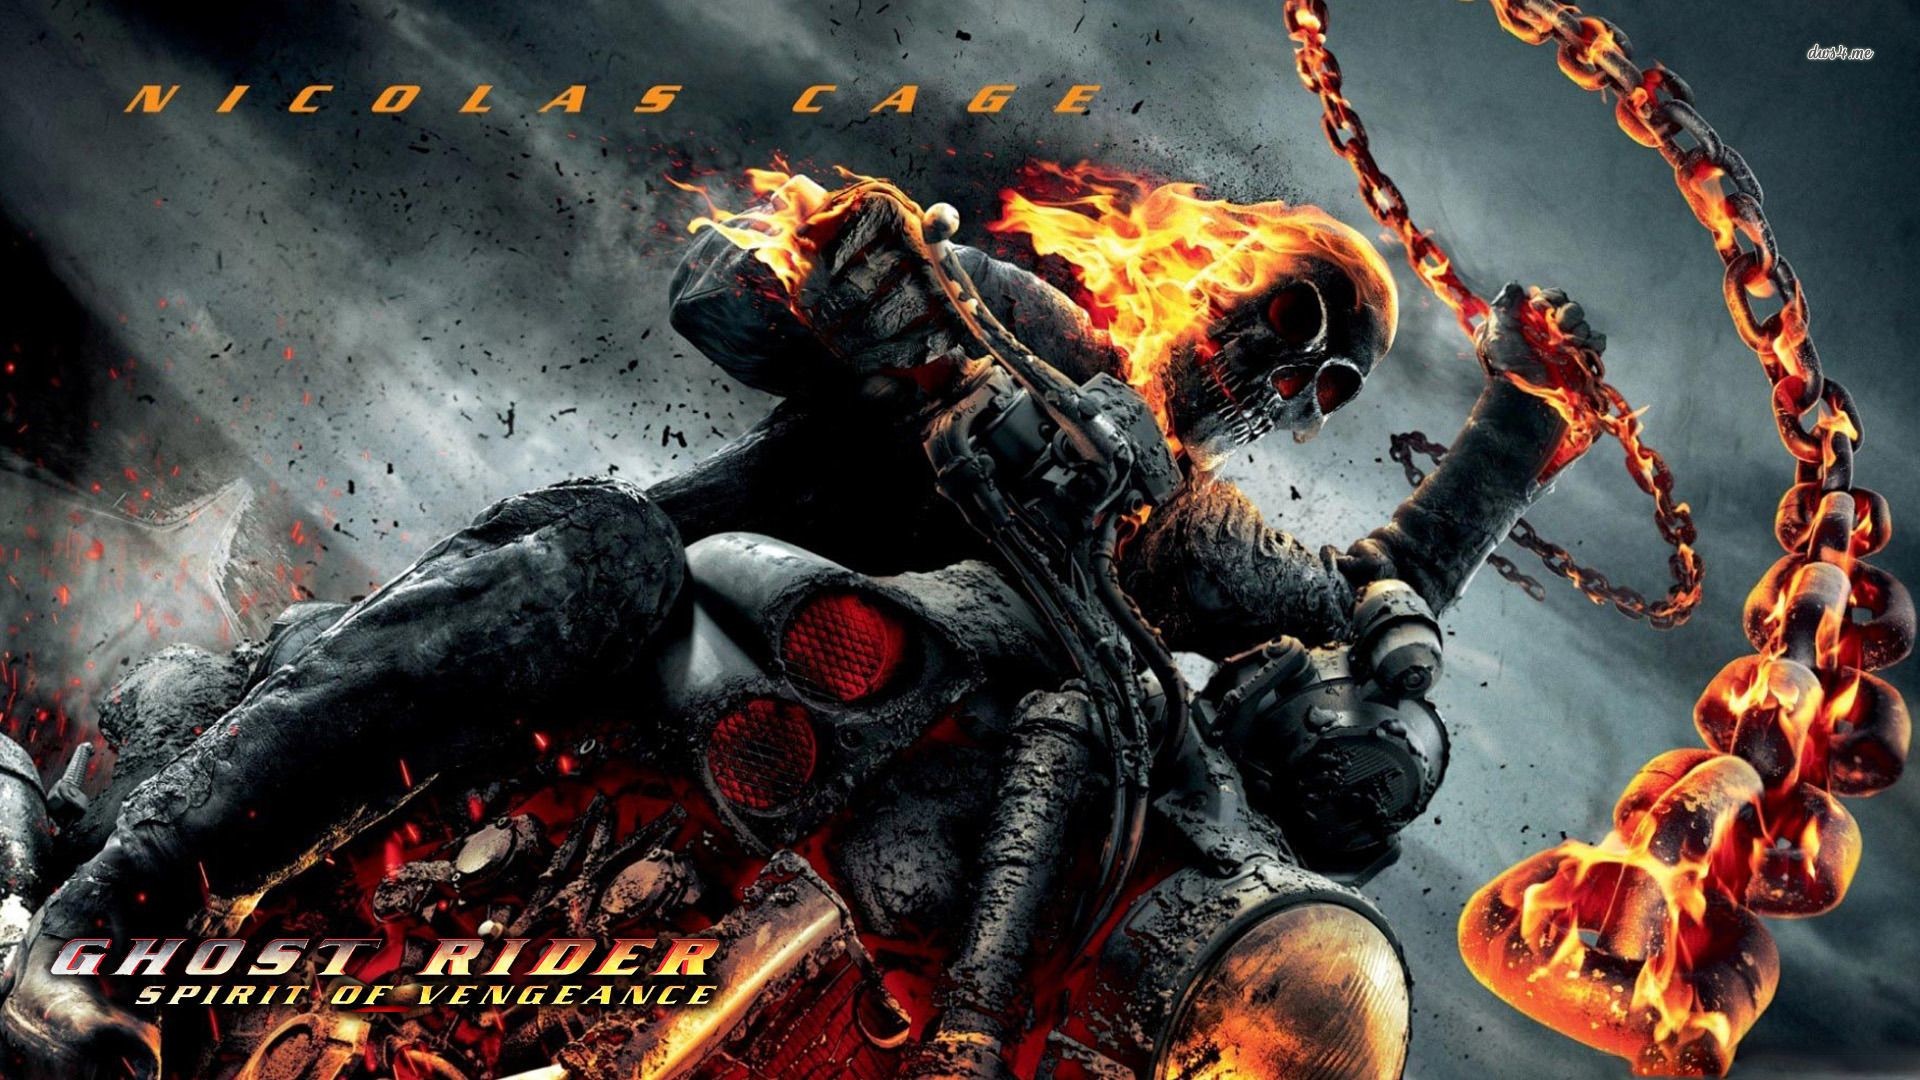 1920x1080 Awesome Ghost Rider Photos – Ghost Rider Wallpapers for desktop and mobile